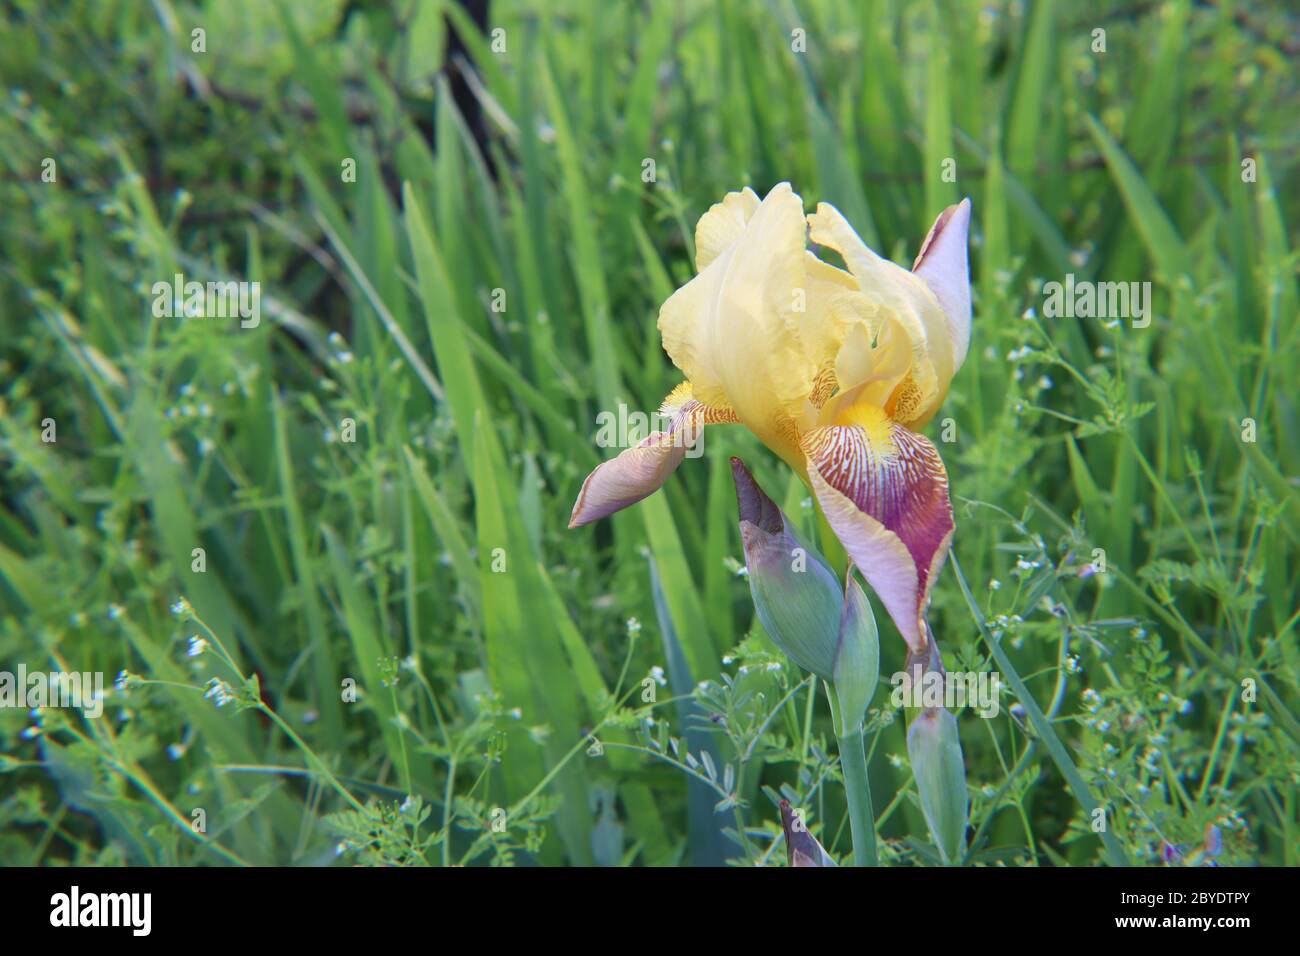 A lone iris bloom stands out in contrast amidst green grasses, space for copy, room for text Stock Photo